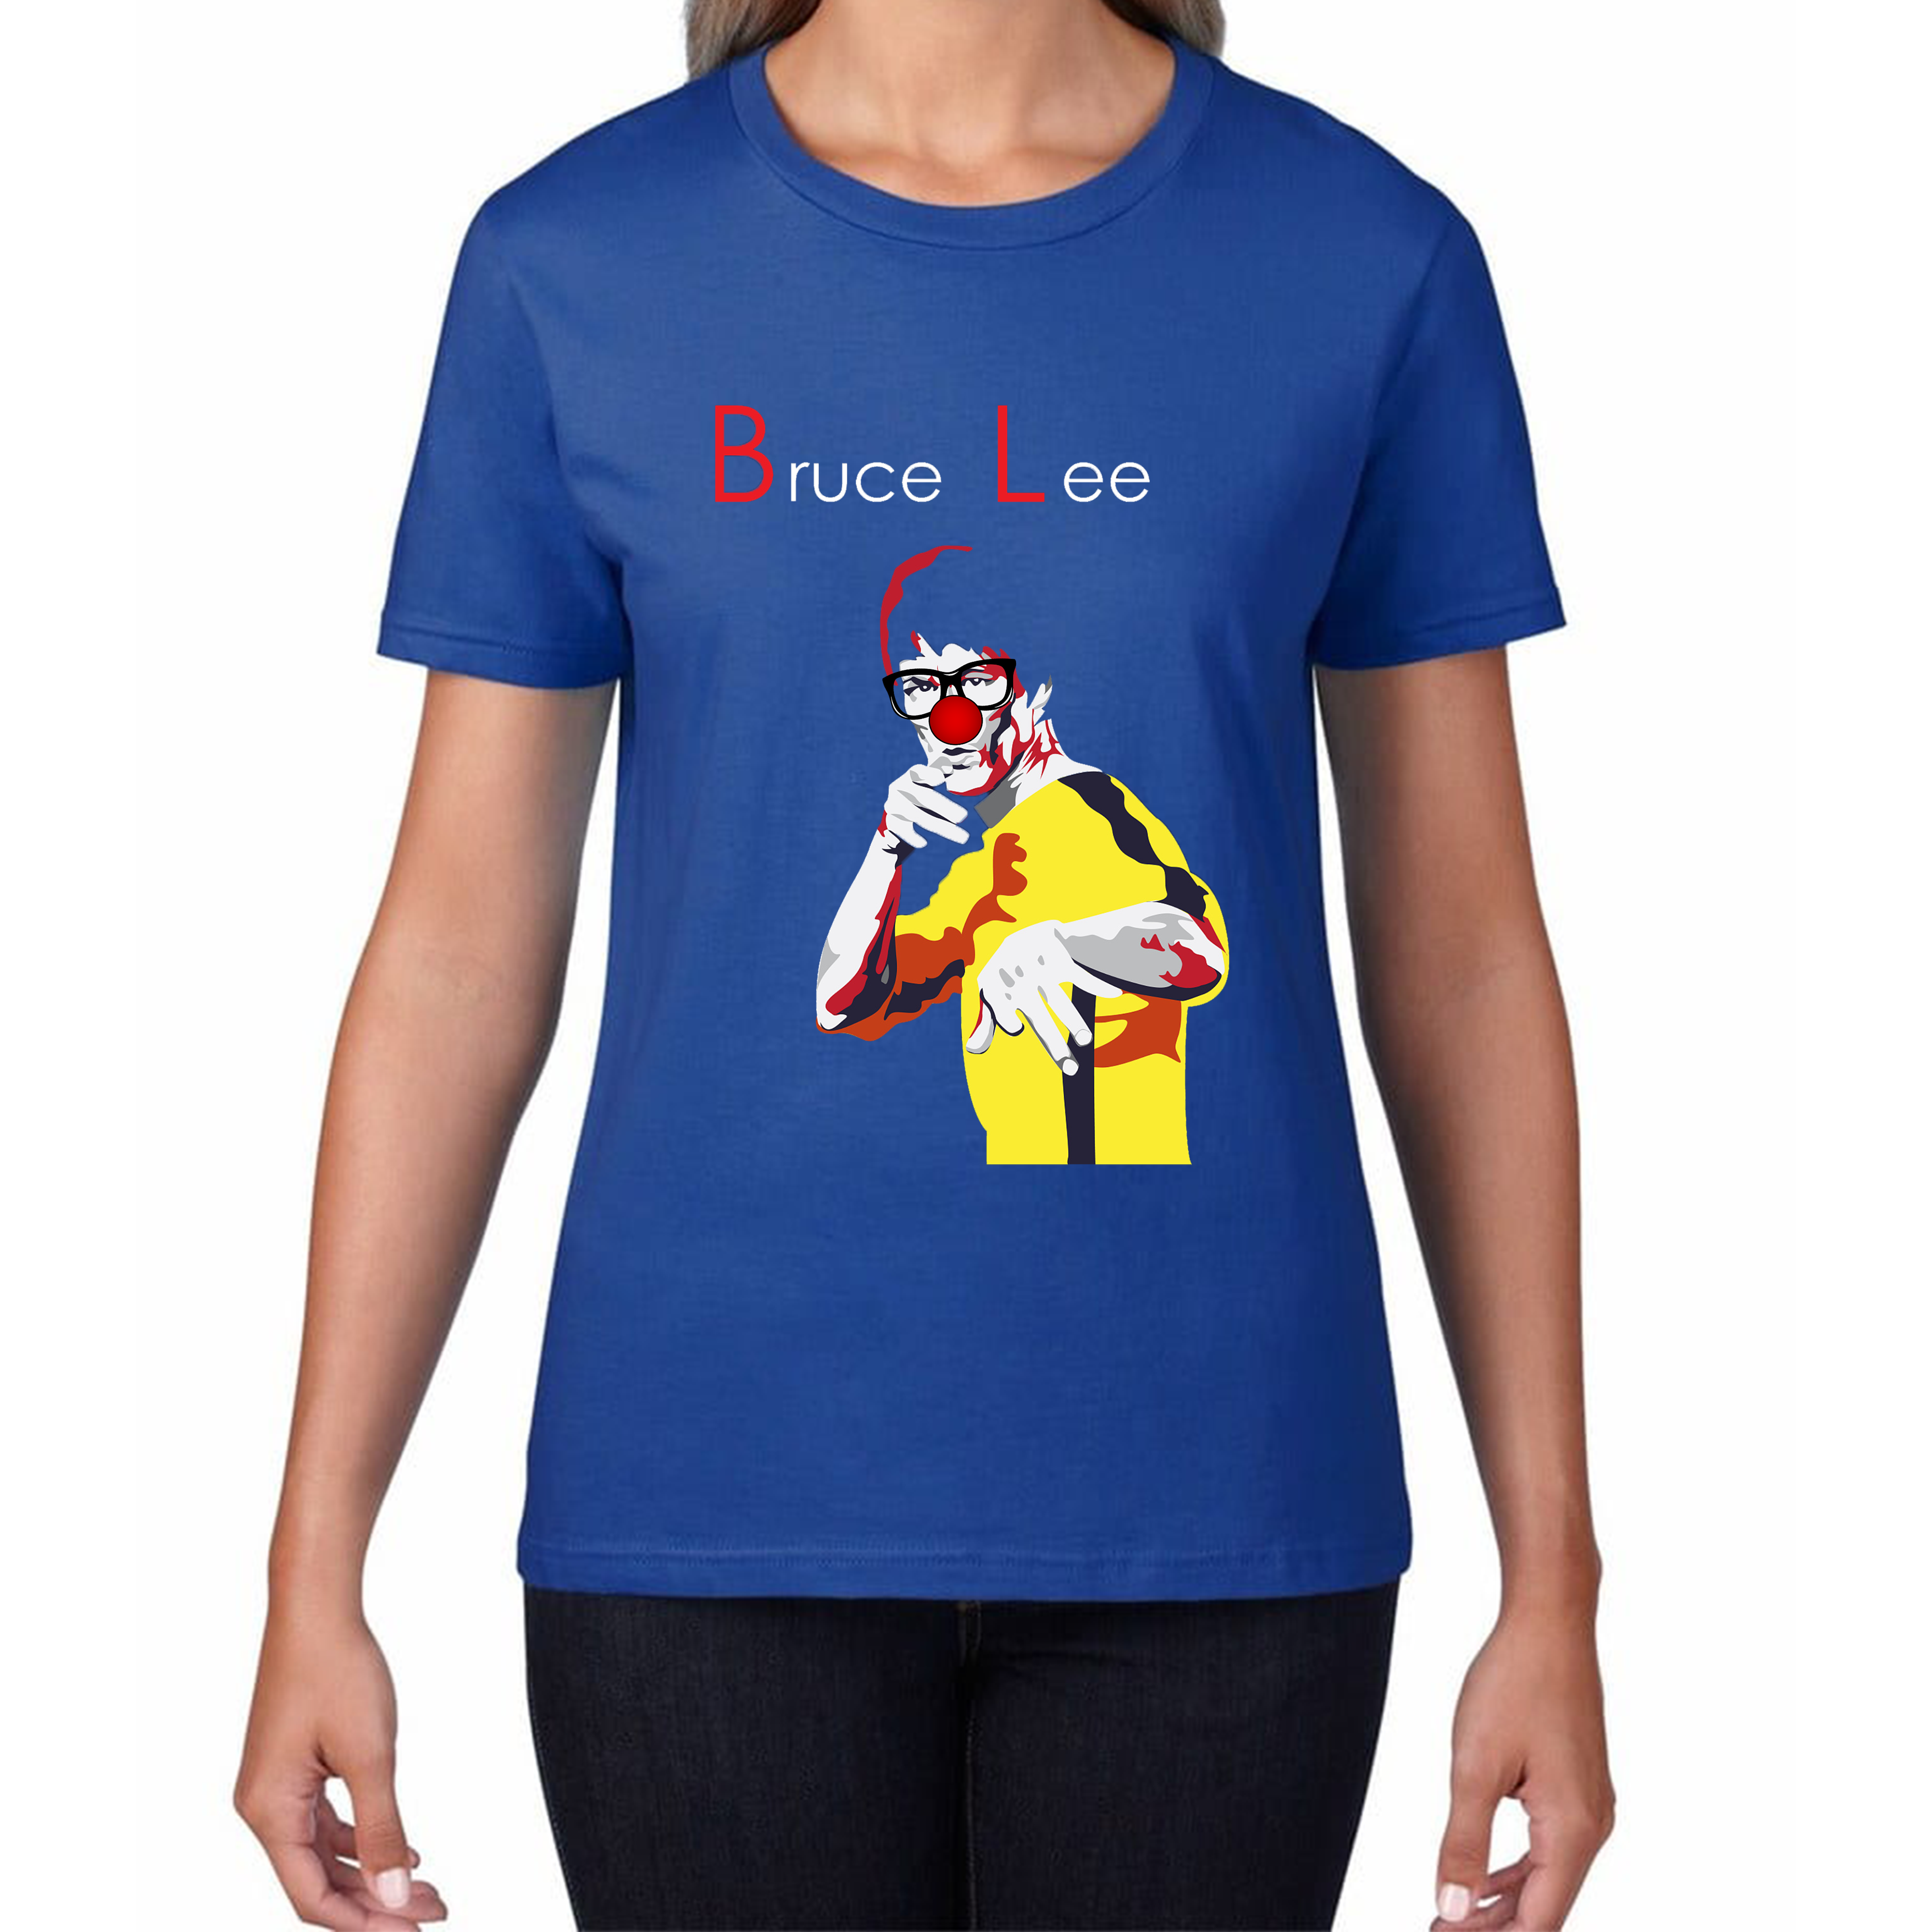 Bruce Lee Red Nose Day Ladies T Shirt. 50% Goes To Charity